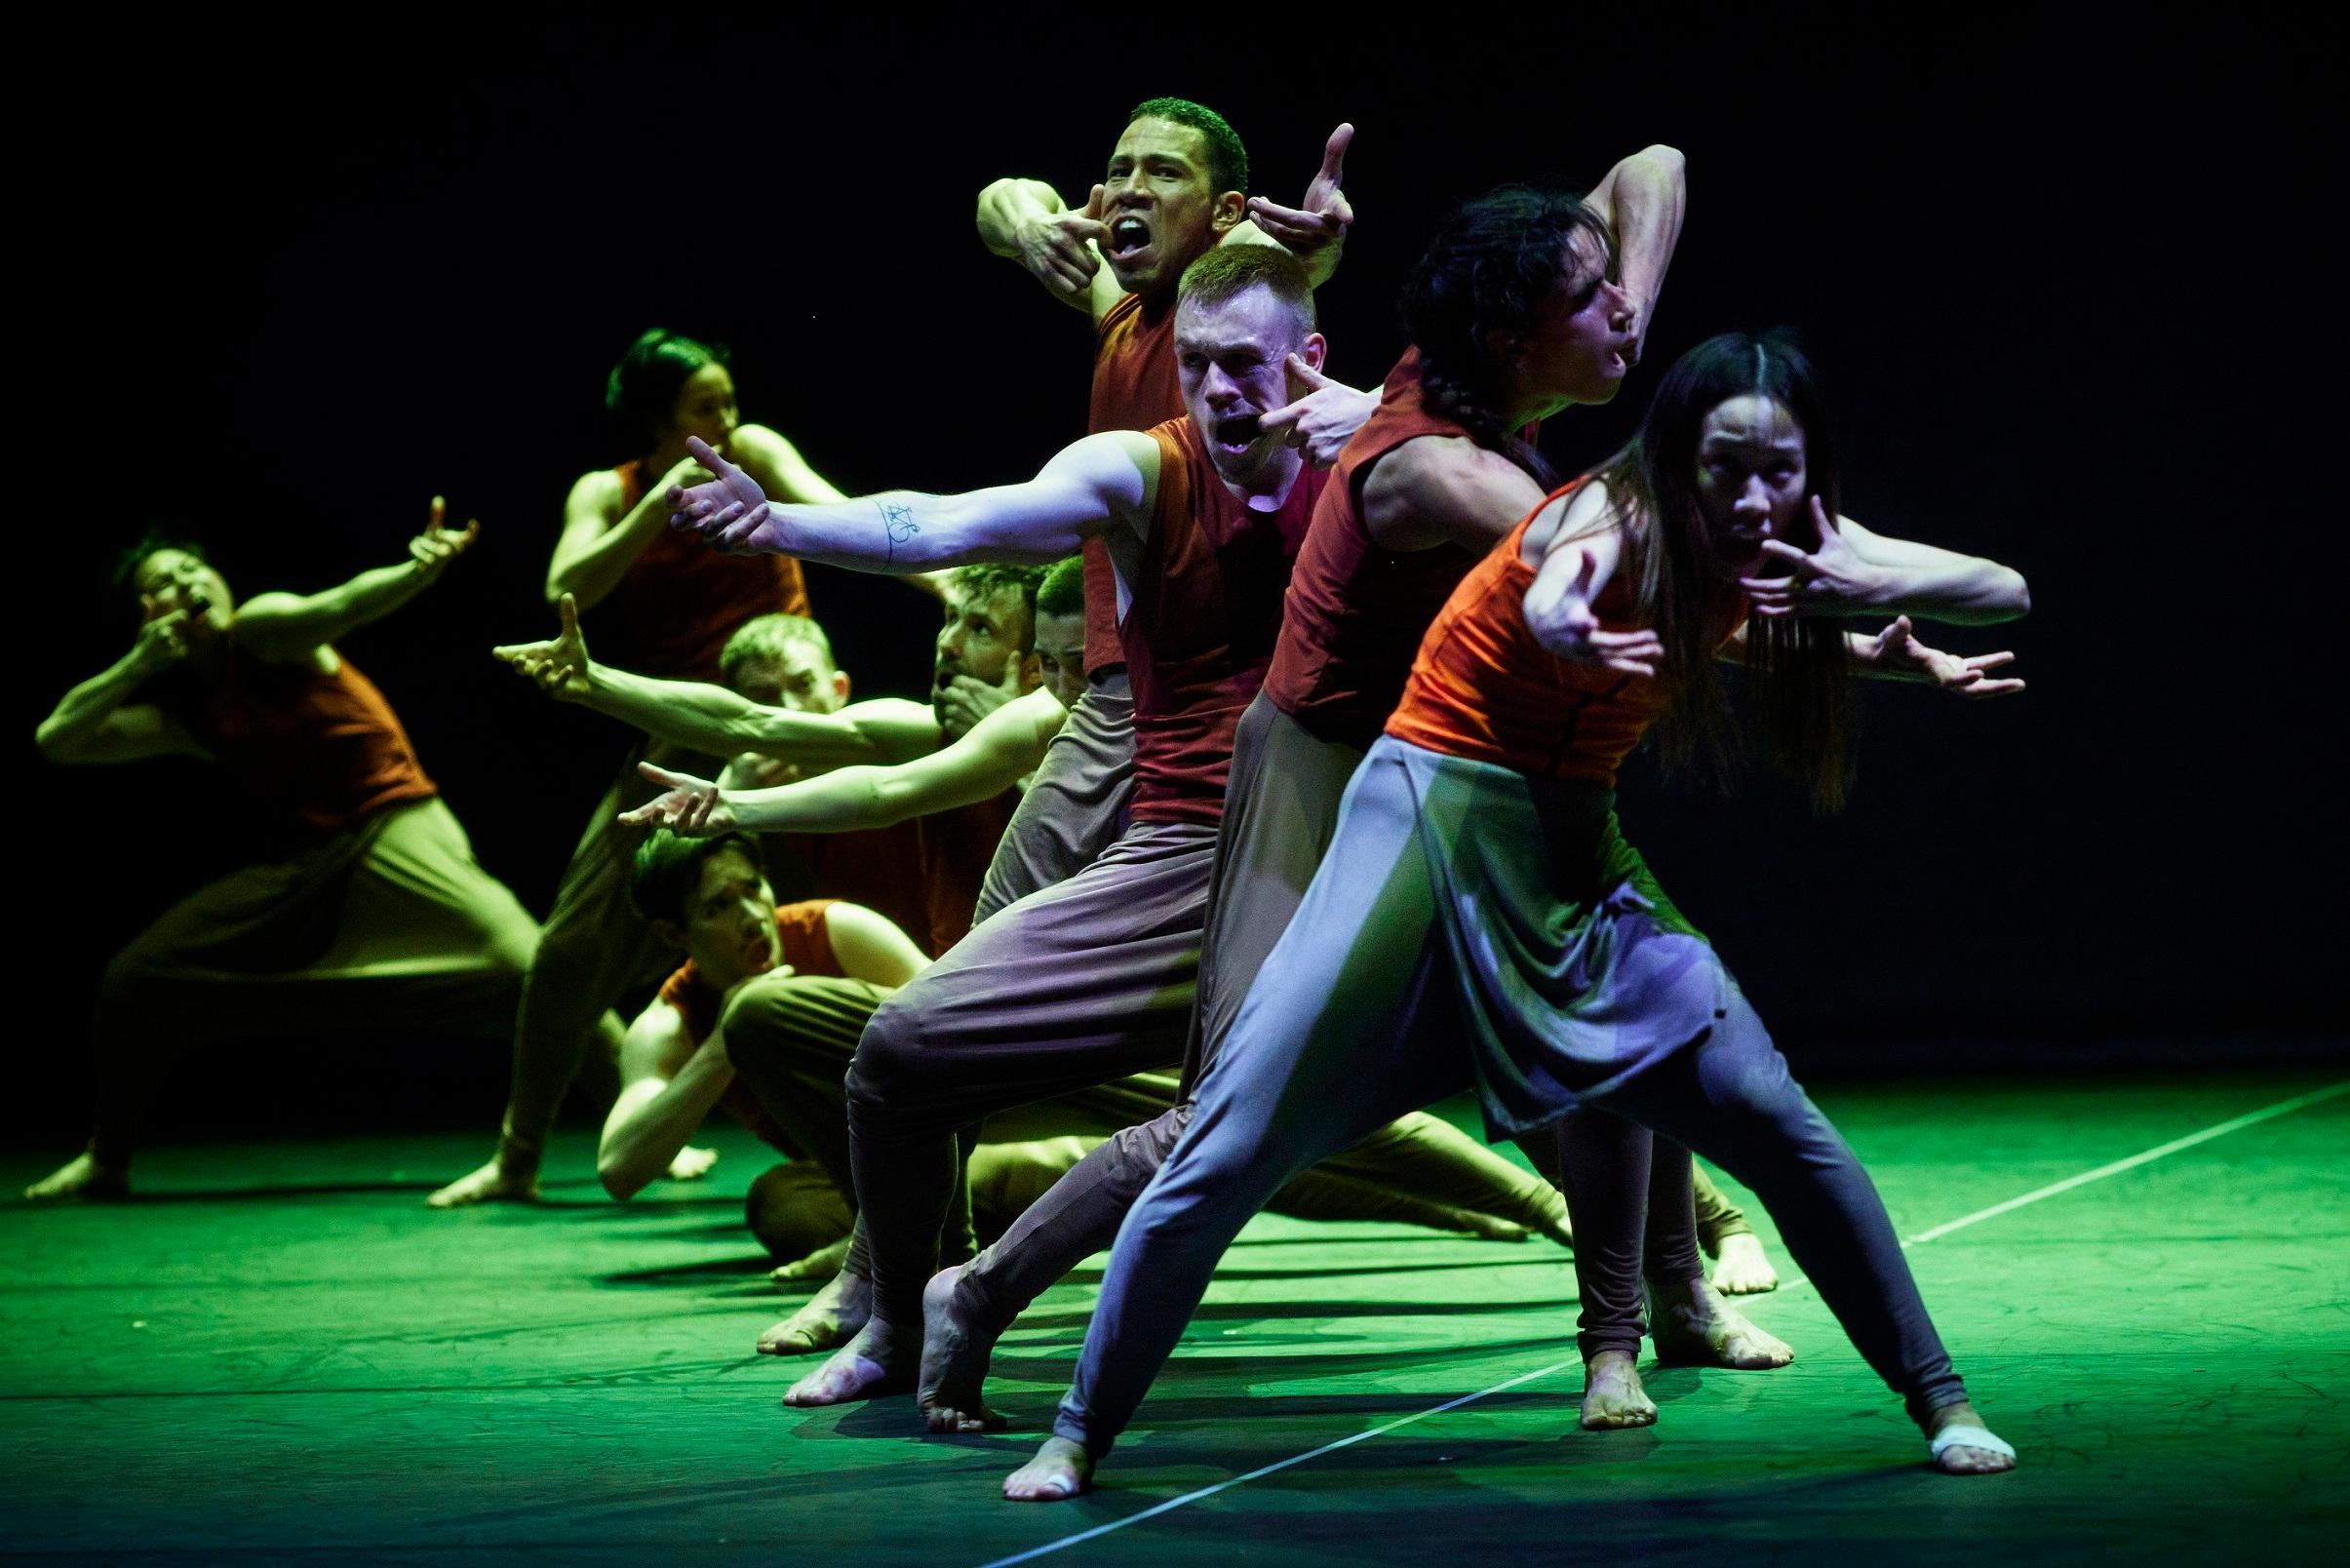 The top-notch dance programme "Jungle Book reimagined", one of the programmes of the New Vision Arts Festival, will be staged on November 11 and 12 at the Hong Kong Cultural Centre Grand Theatre. "Jungle Book reimagined" unleashes animal instincts internalised by the dancers amidst thunderous original music, and envelopes the senses with animated projections, portraying a world where humans betray nature. (Photo: Ambra Vernuccio)
